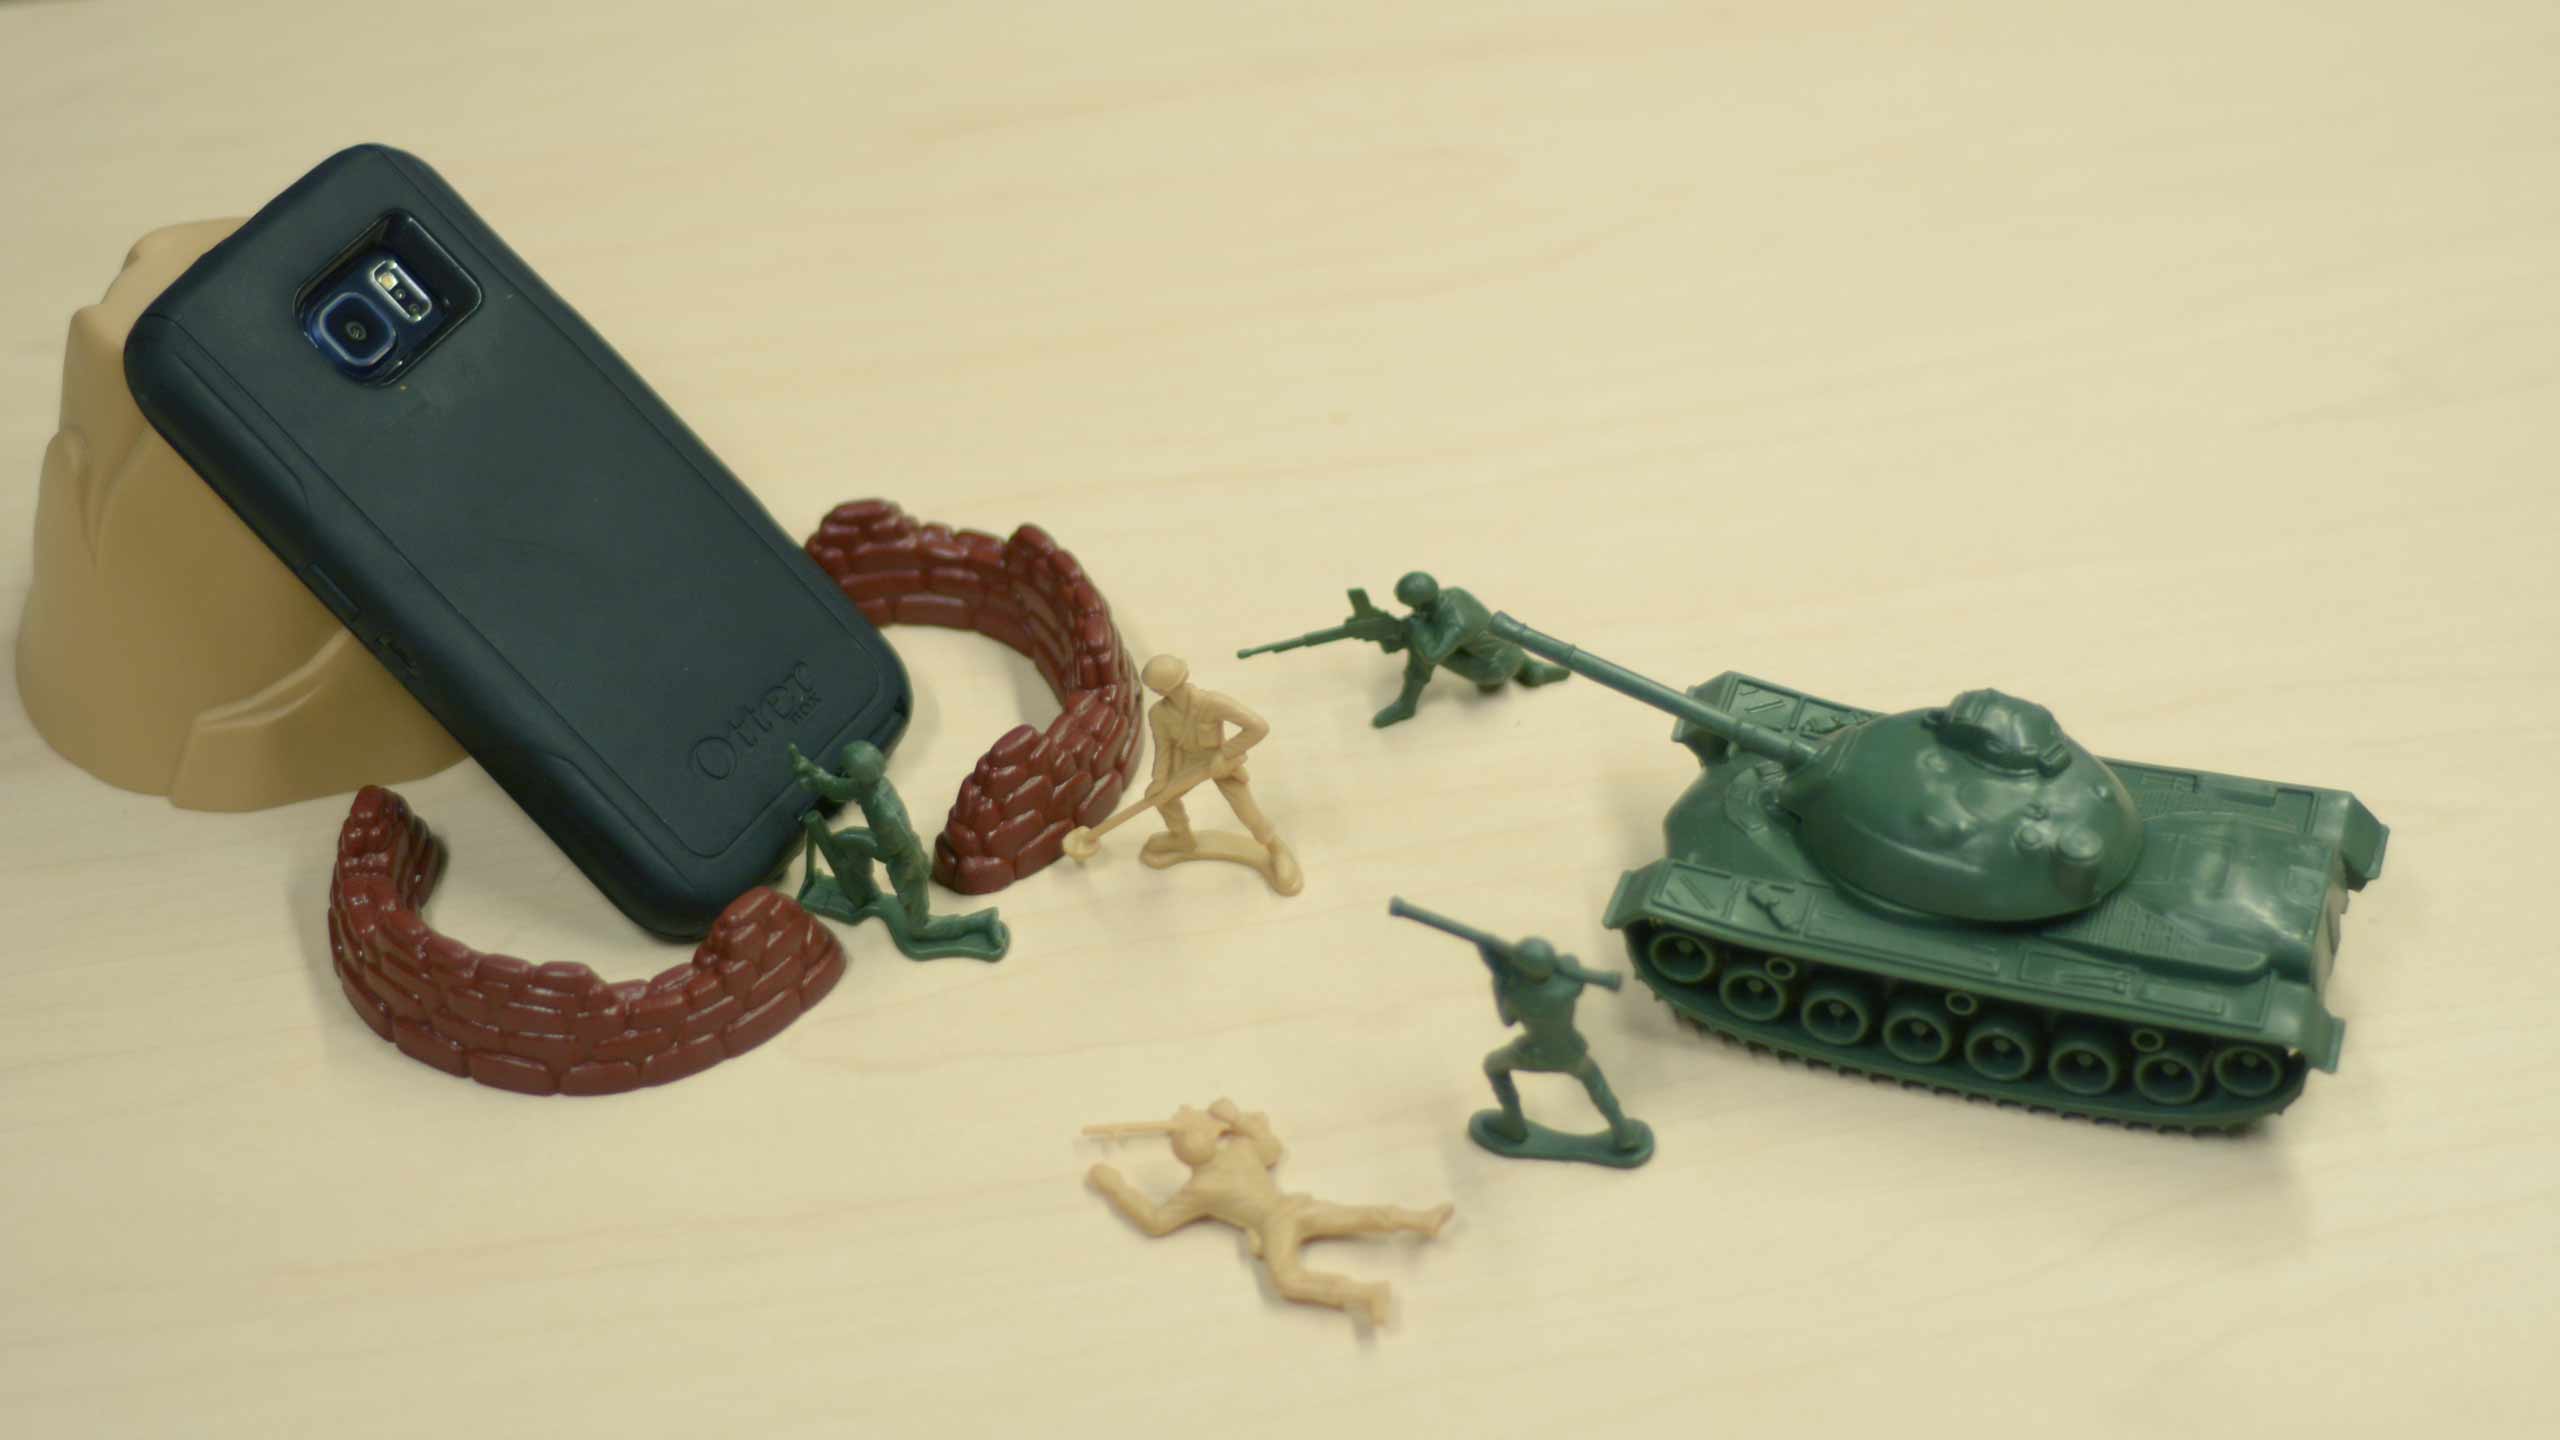 Toy army soldiers fighting a cell phone